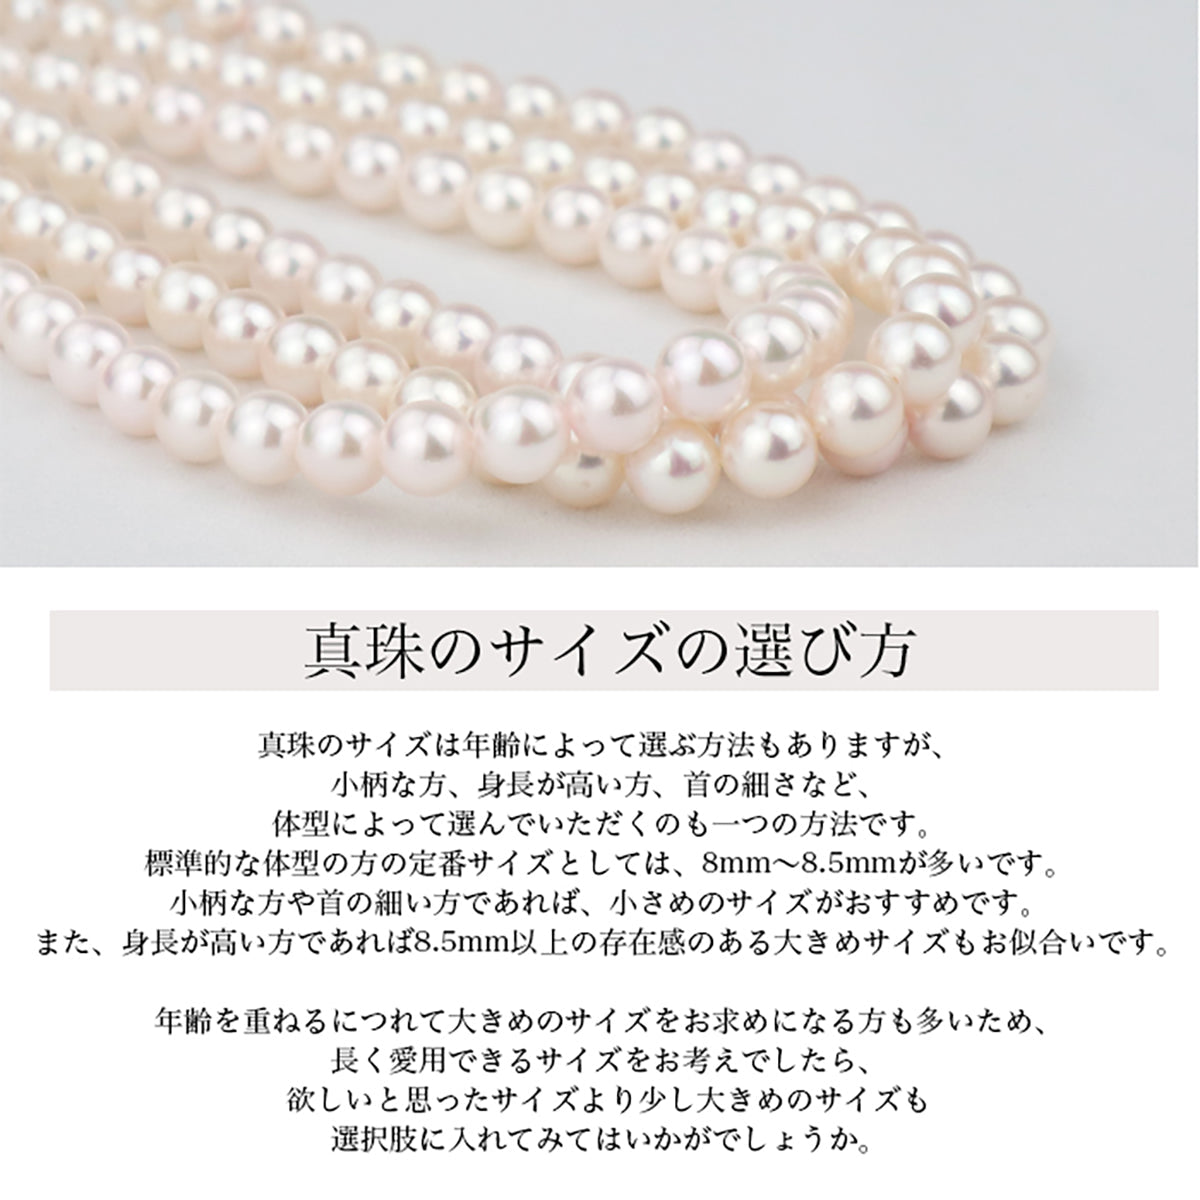 [Metal Allergy Compatible] Akoya Pearl Formal Necklace Set of 2 [8.0-8.5mm] (Earrings/Non-pierced Earrings) Formal Set with Certificate of Authenticity and Storage Case